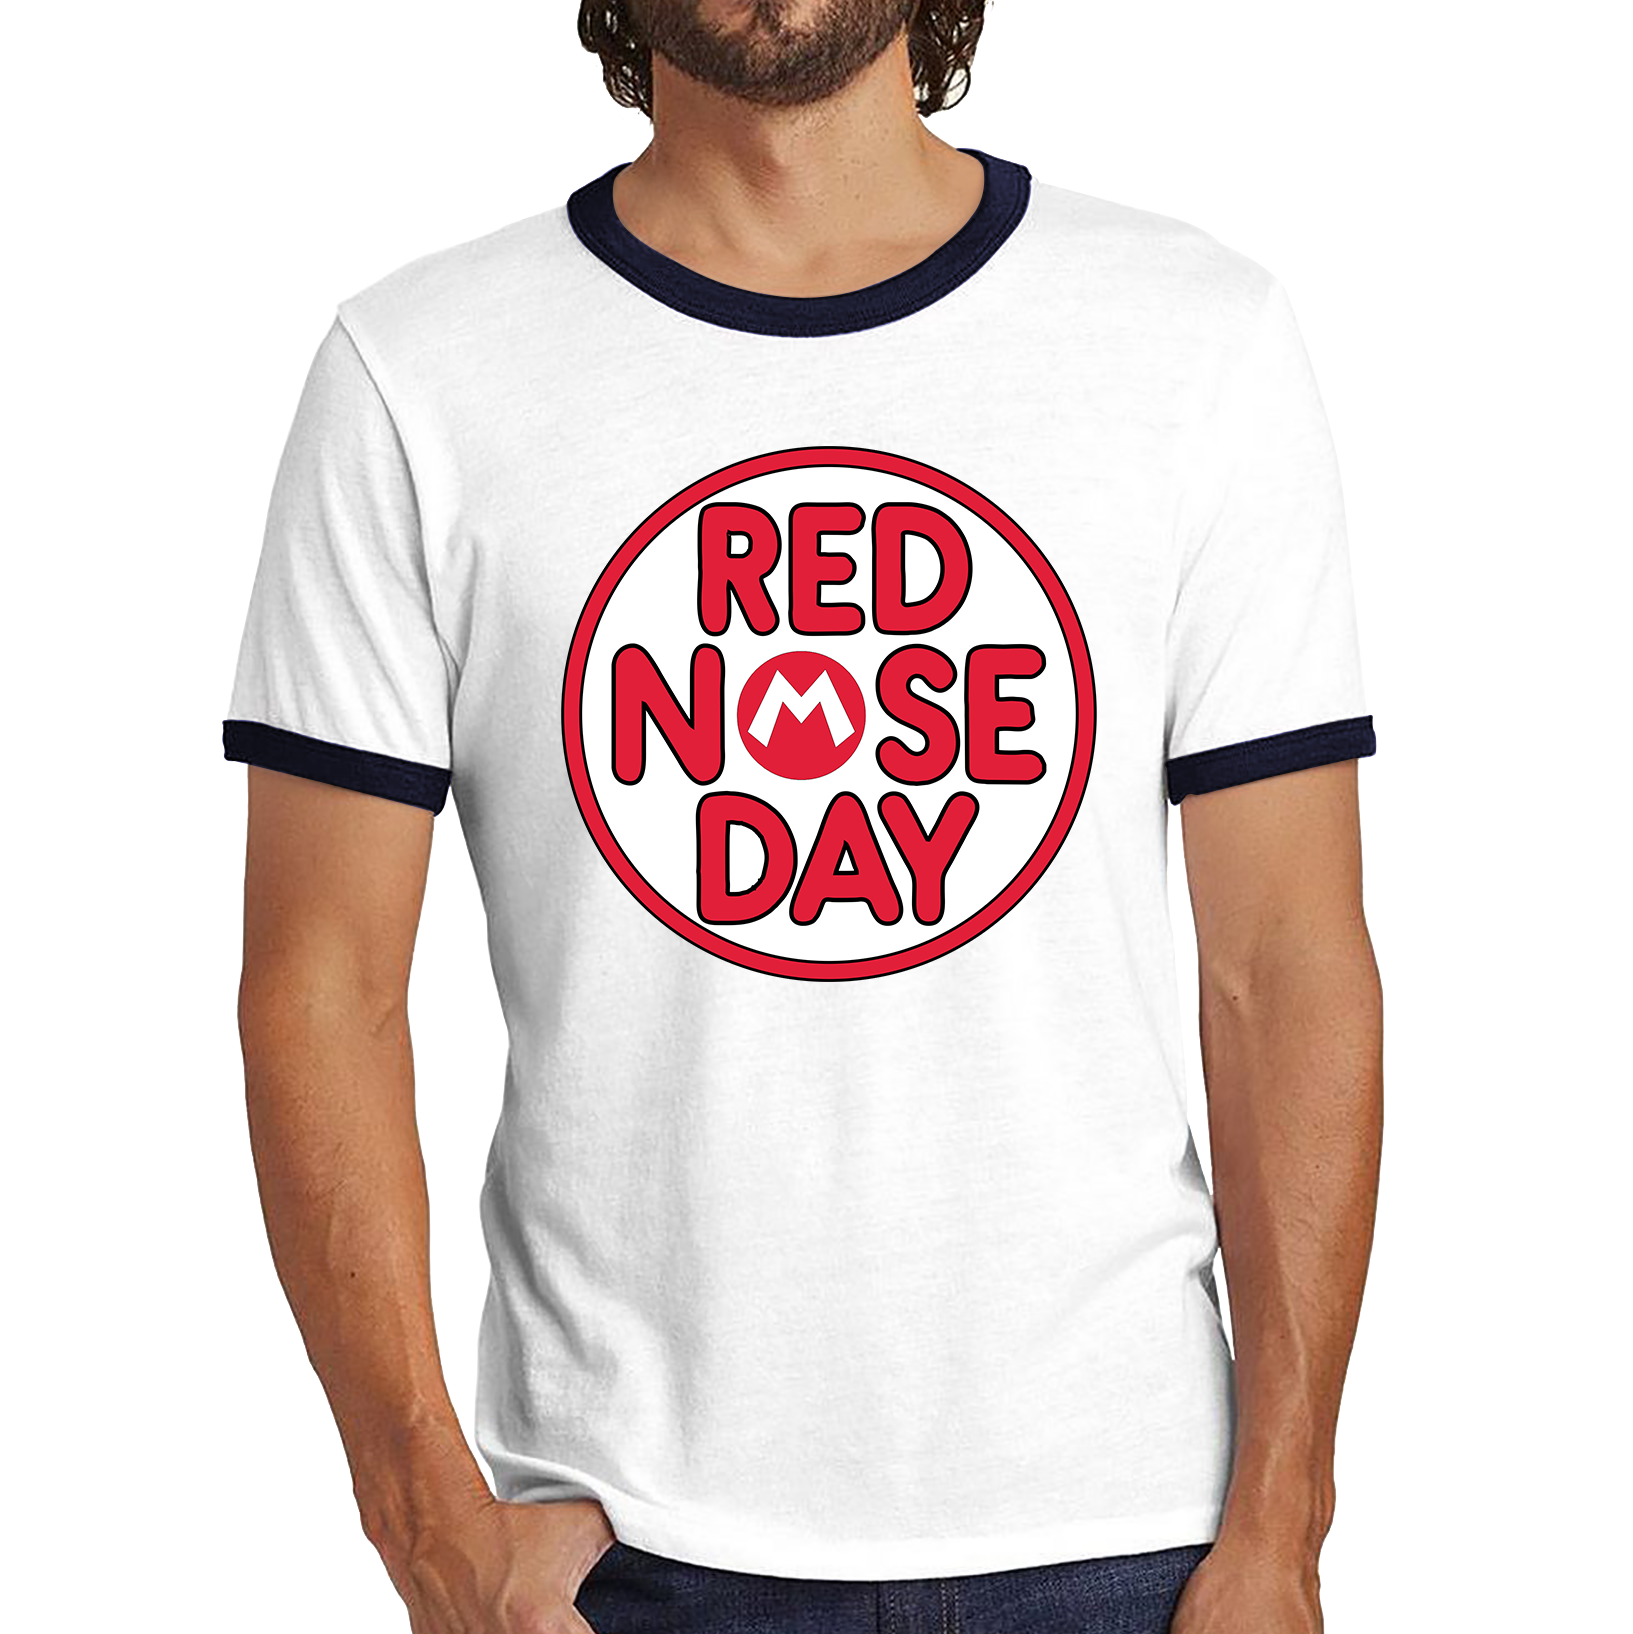 Super Mario Red Nose Day Ringer T Shirt. 50% Goes To Charity